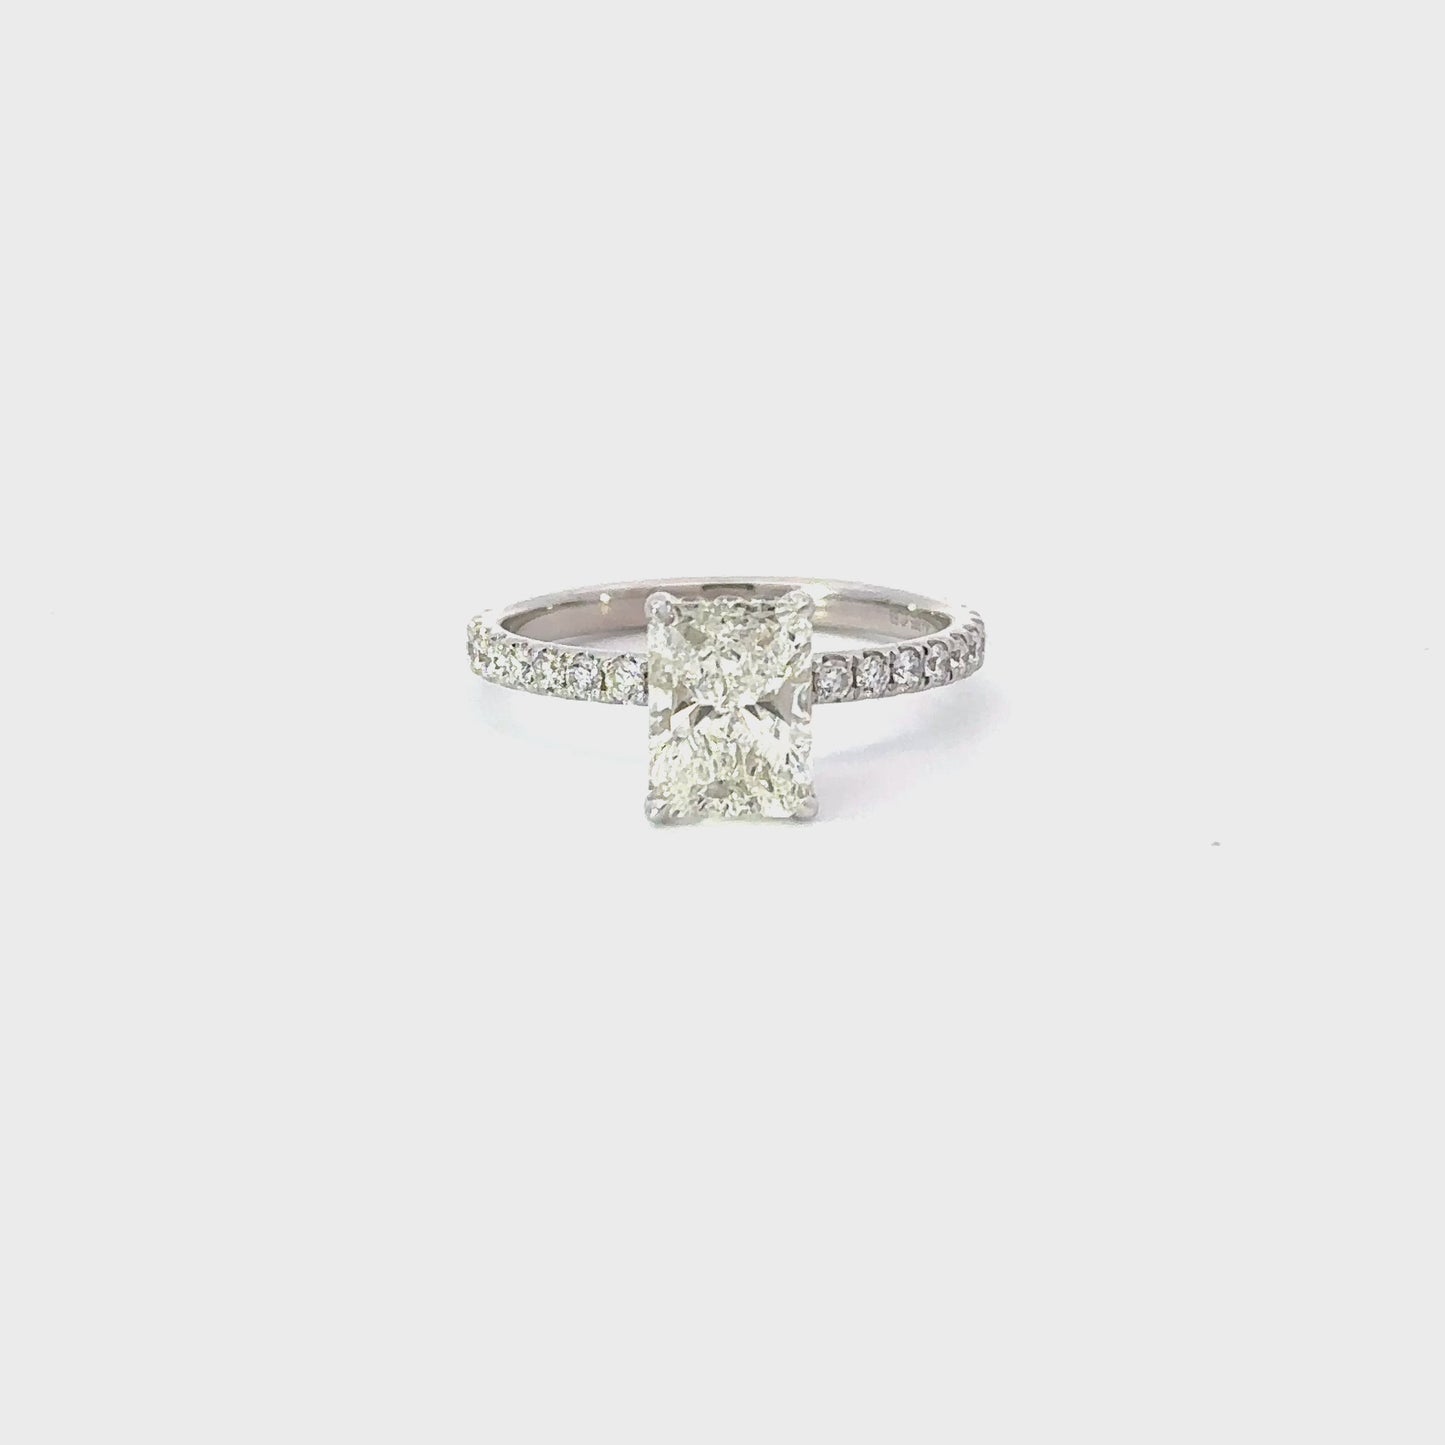 1.51 Carat Radiant Natural Diamond Engagement Ring with Signature Setting